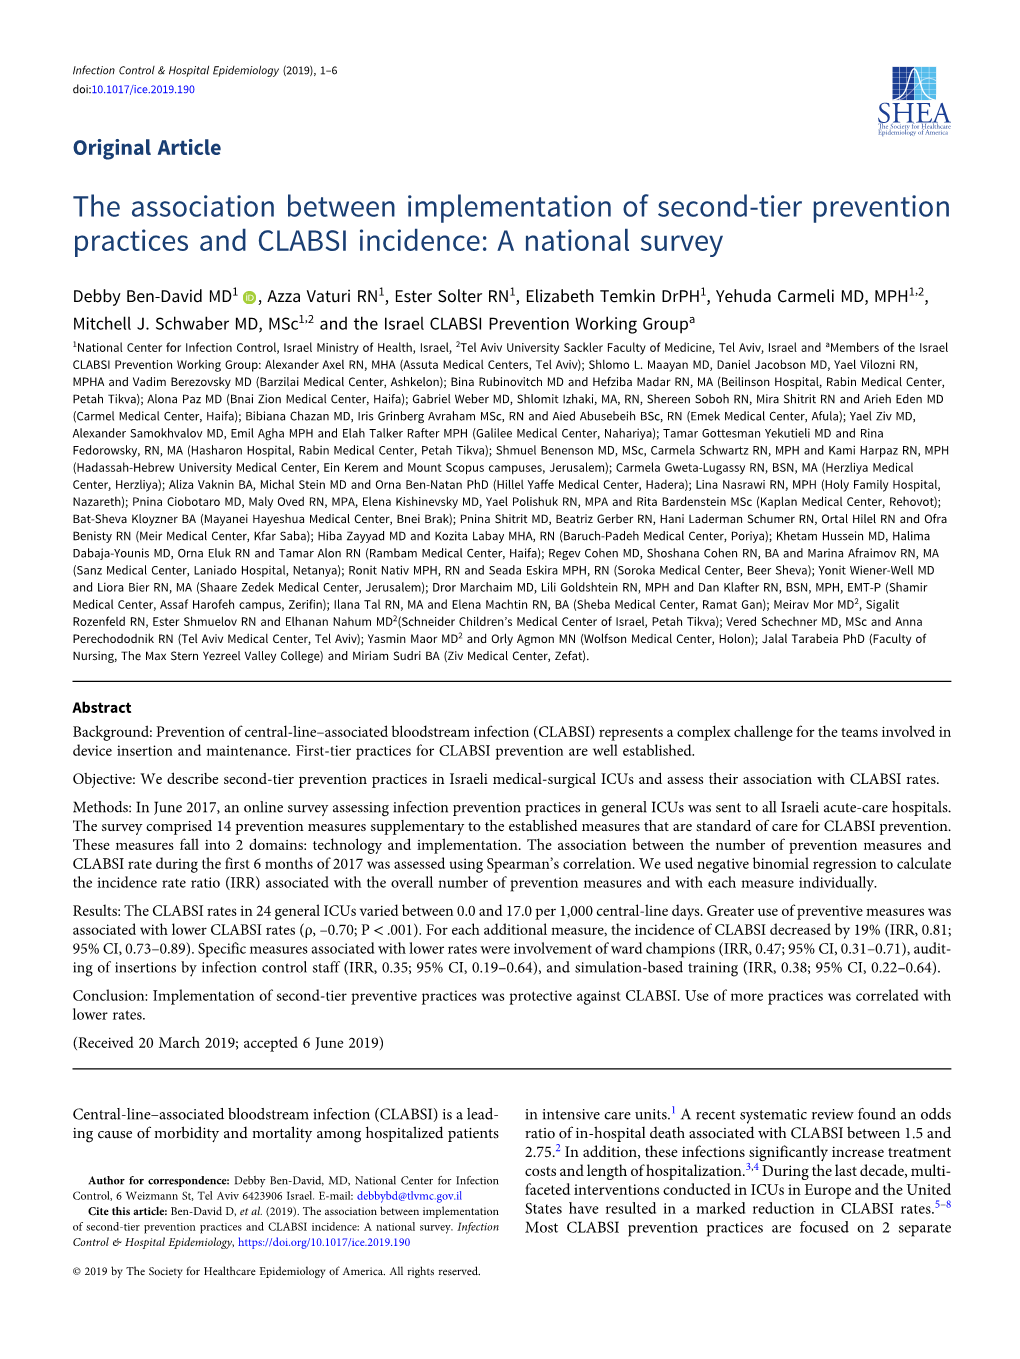 The Association Between Implementation of Second-Tier Prevention Practices and CLABSI Incidence: a National Survey